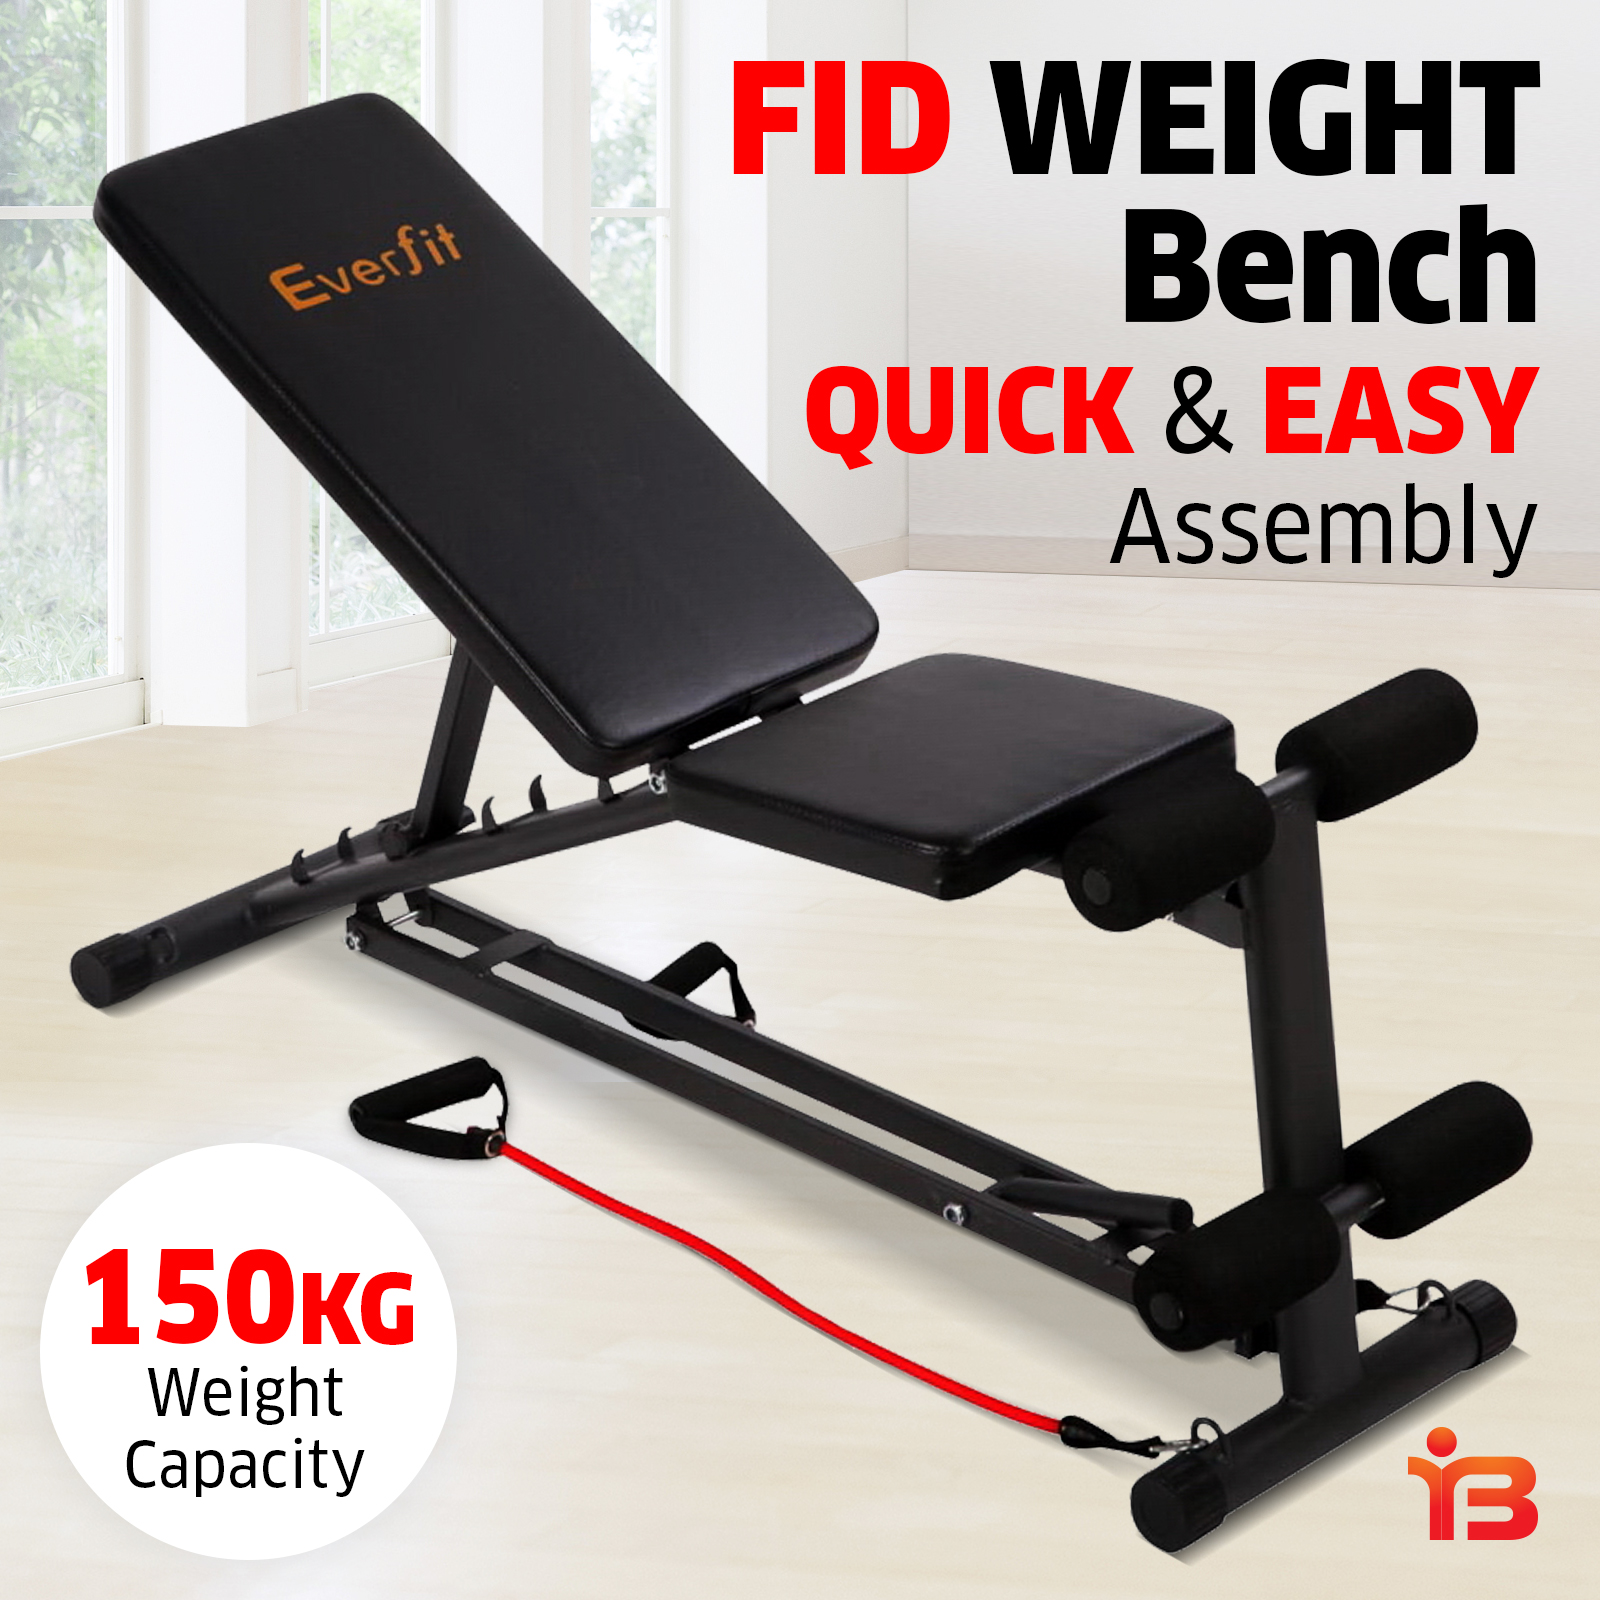 Adjustable FID Weight Bench Flat Everfit Workout Incline Fitness Gym Equipment